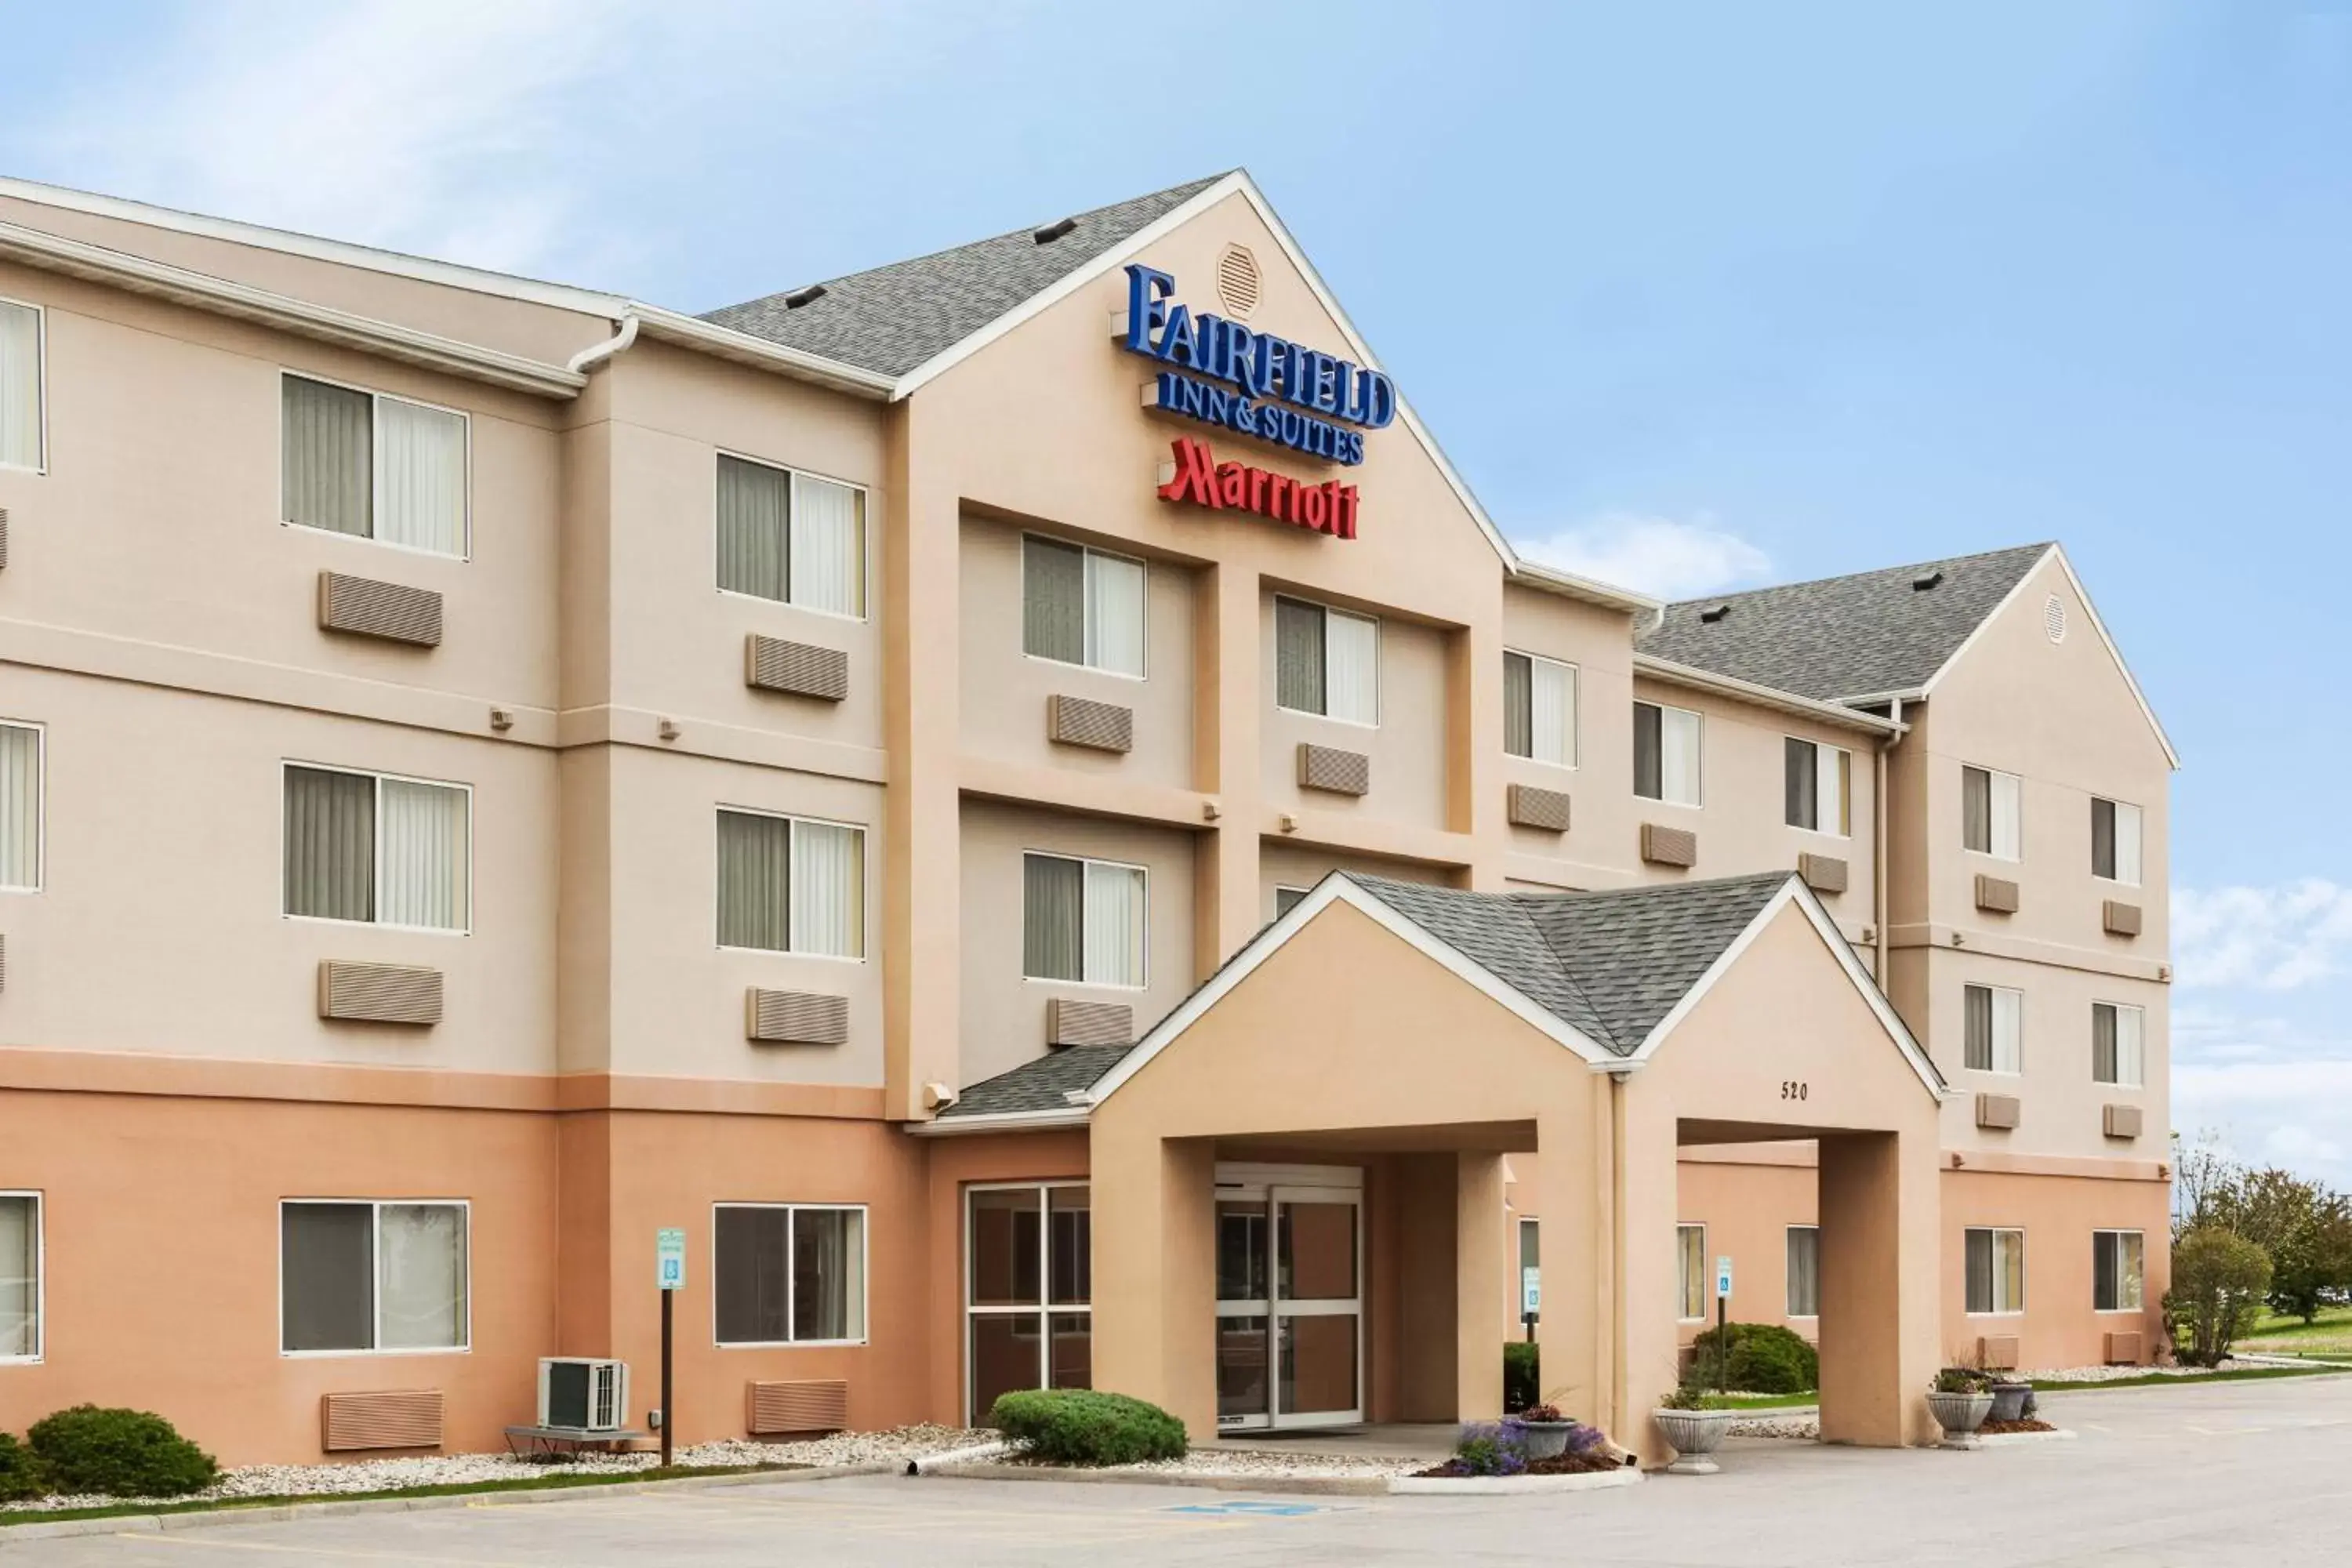 Property Building in Fairfield Inn & Suites Omaha East/Council Bluffs, IA